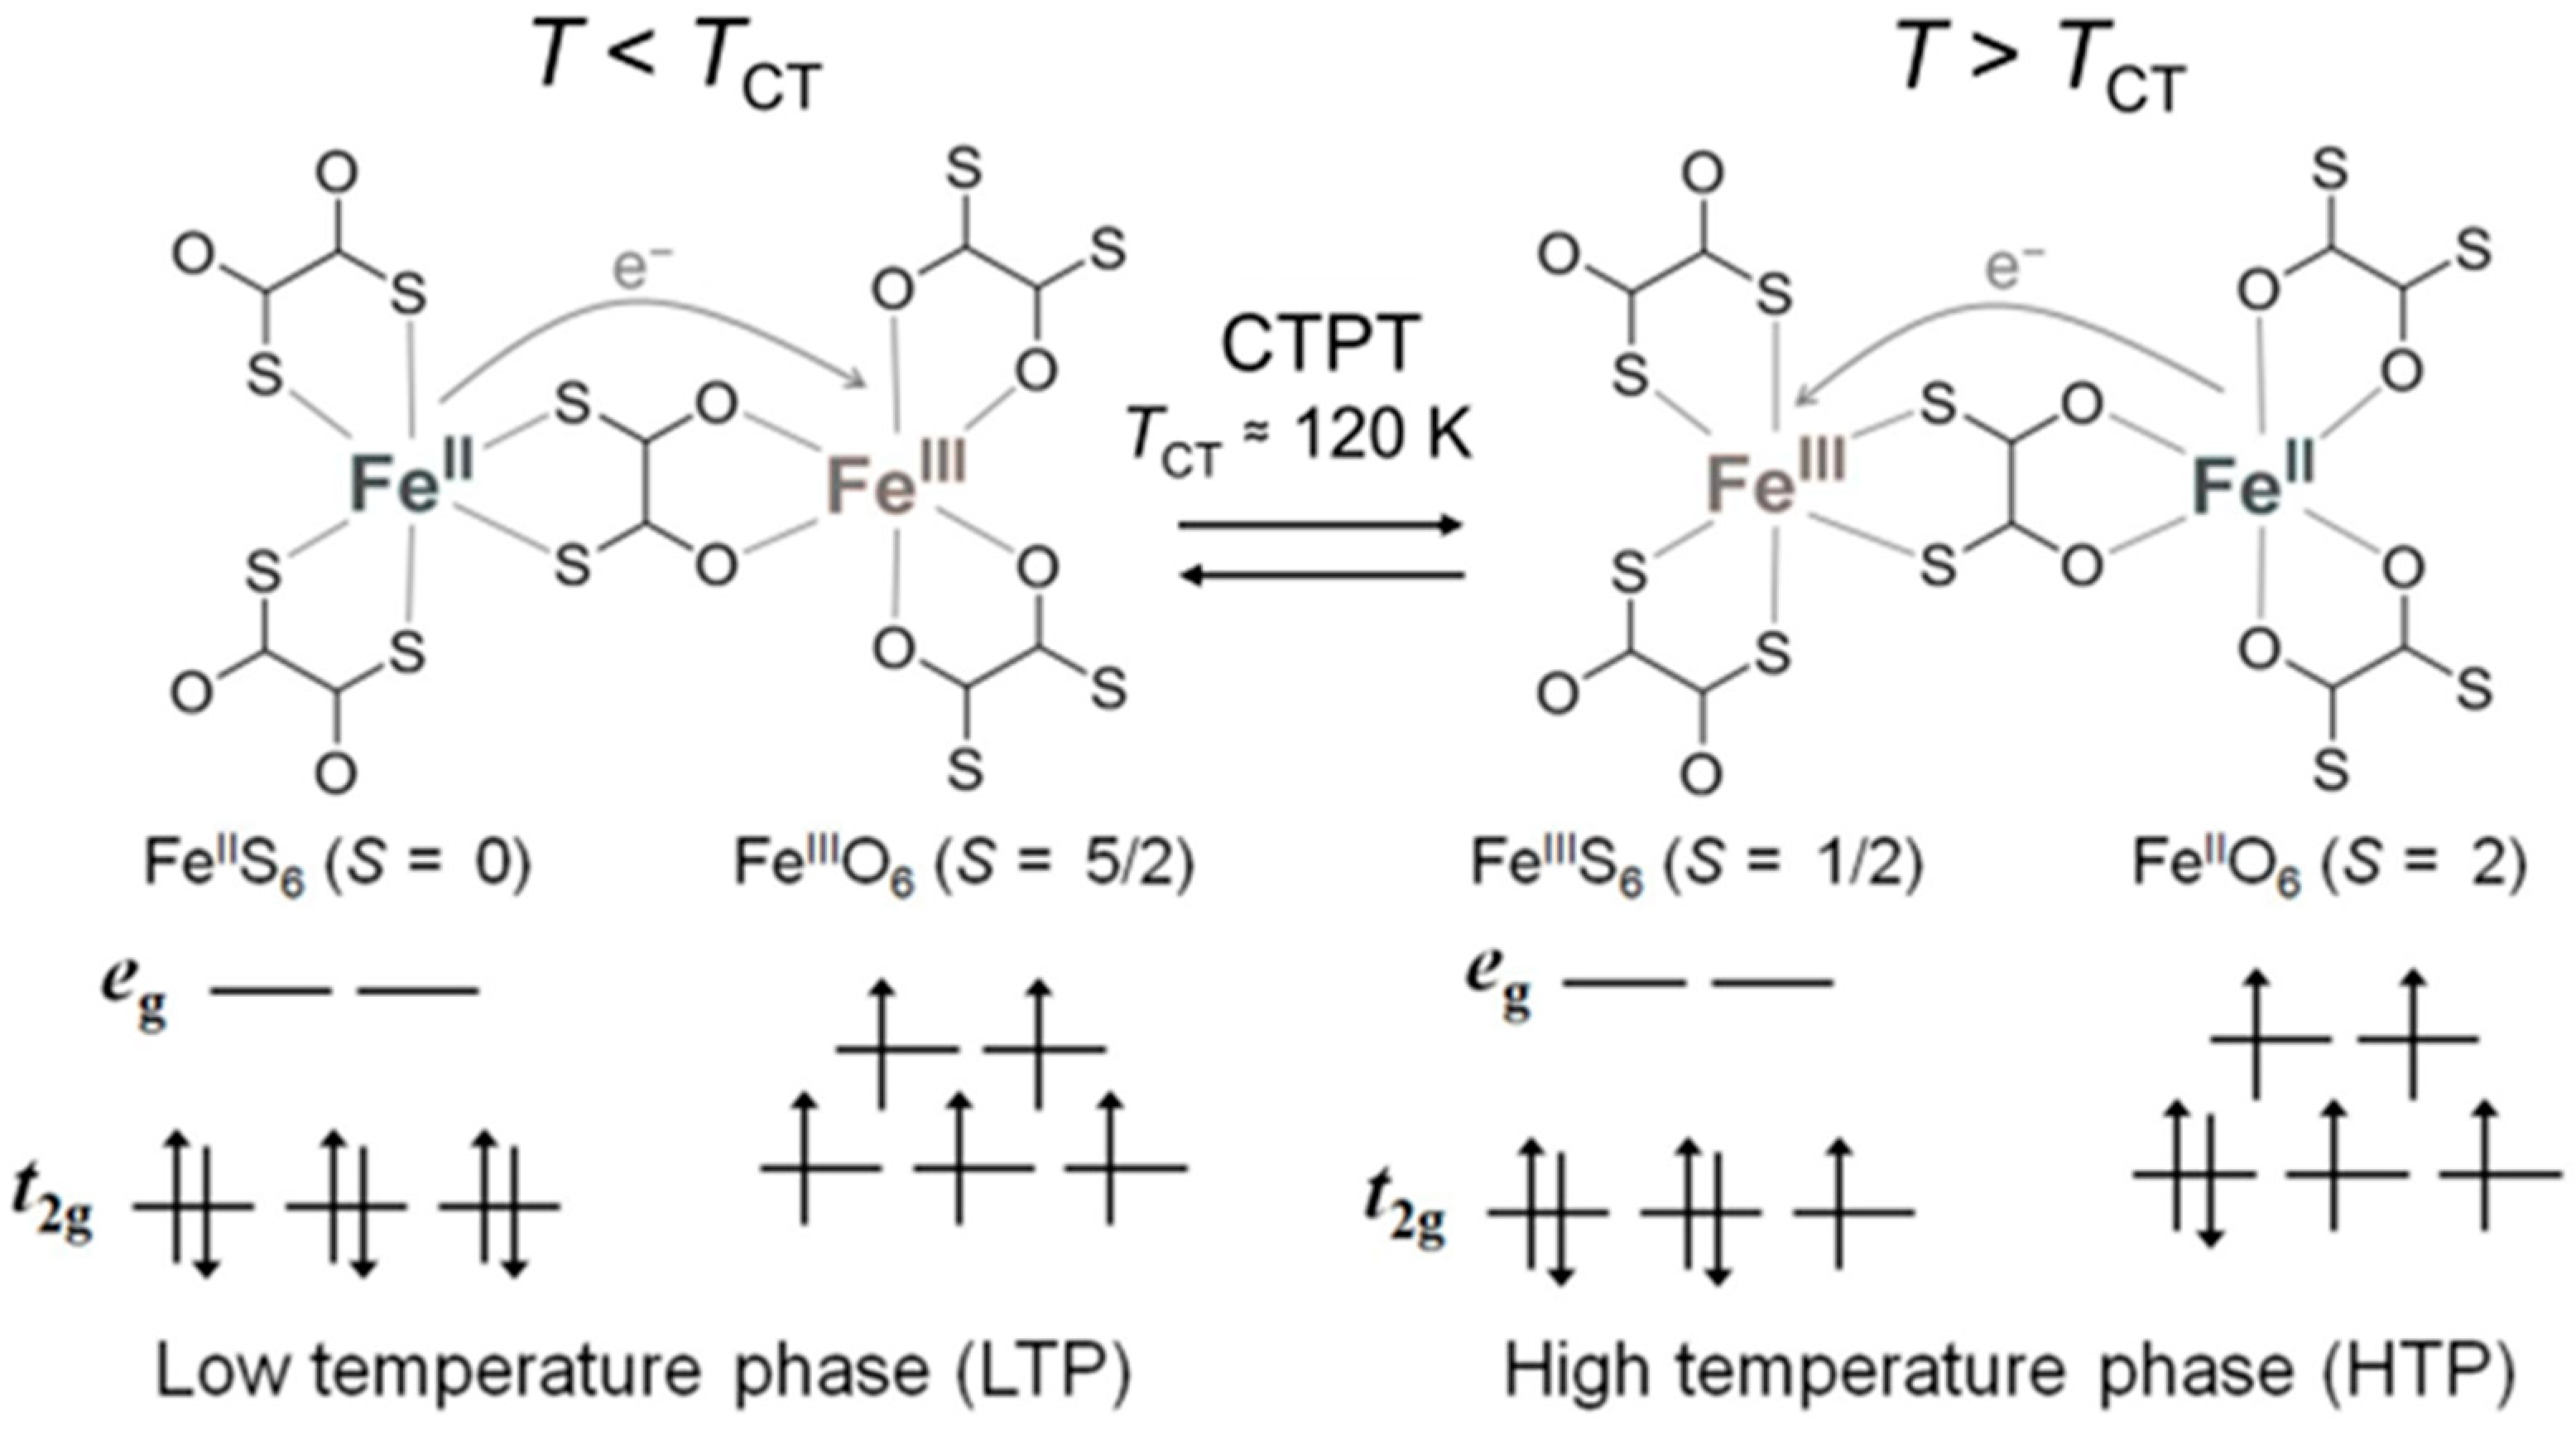 Crystals | Free Full-Text | Effect of Transition Metal Substitution on the  Charge-Transfer Phase Transition and Ferromagnetism of  Dithiooxalato-Bridged Hetero Metal Complexes,  (n-C3H7)4N[FeII1−xMnIIxFeIII(dto)3] | HTML